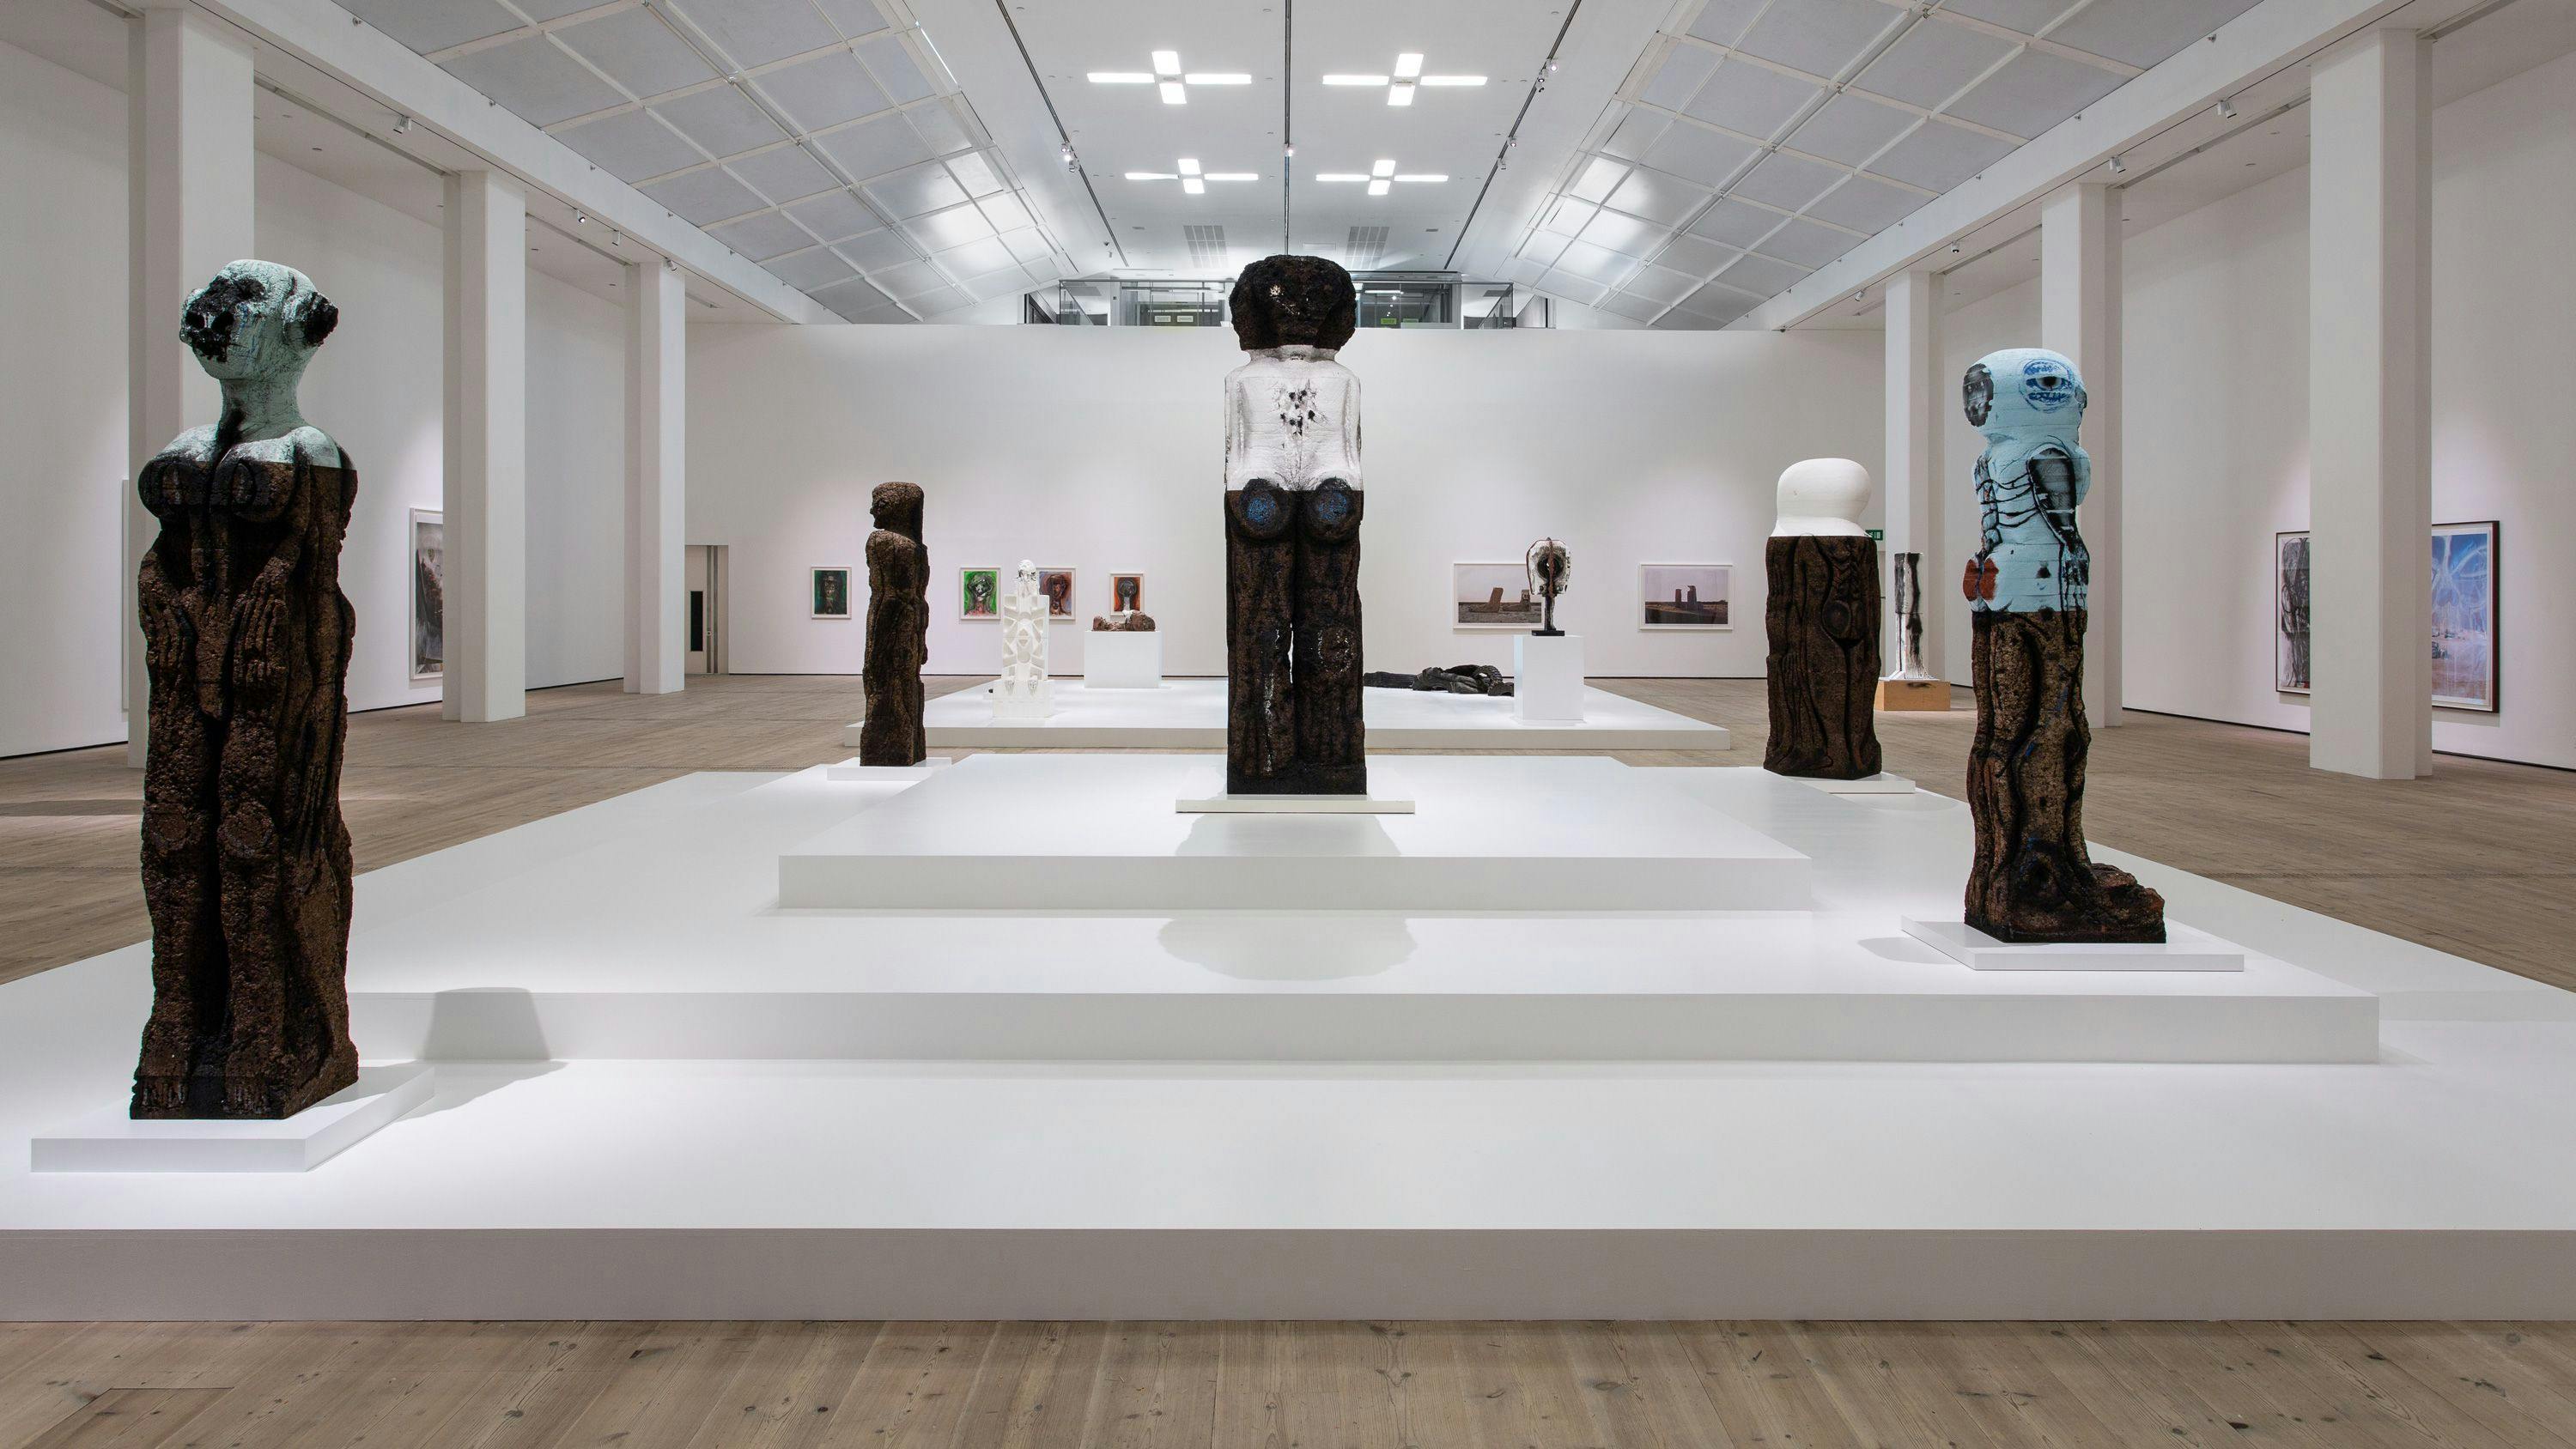 Installation view of the exhibition, Huma Bhabha: Against Time, at the BALTIC Centre for Contemporary Art in Gateshead, dated 2020.